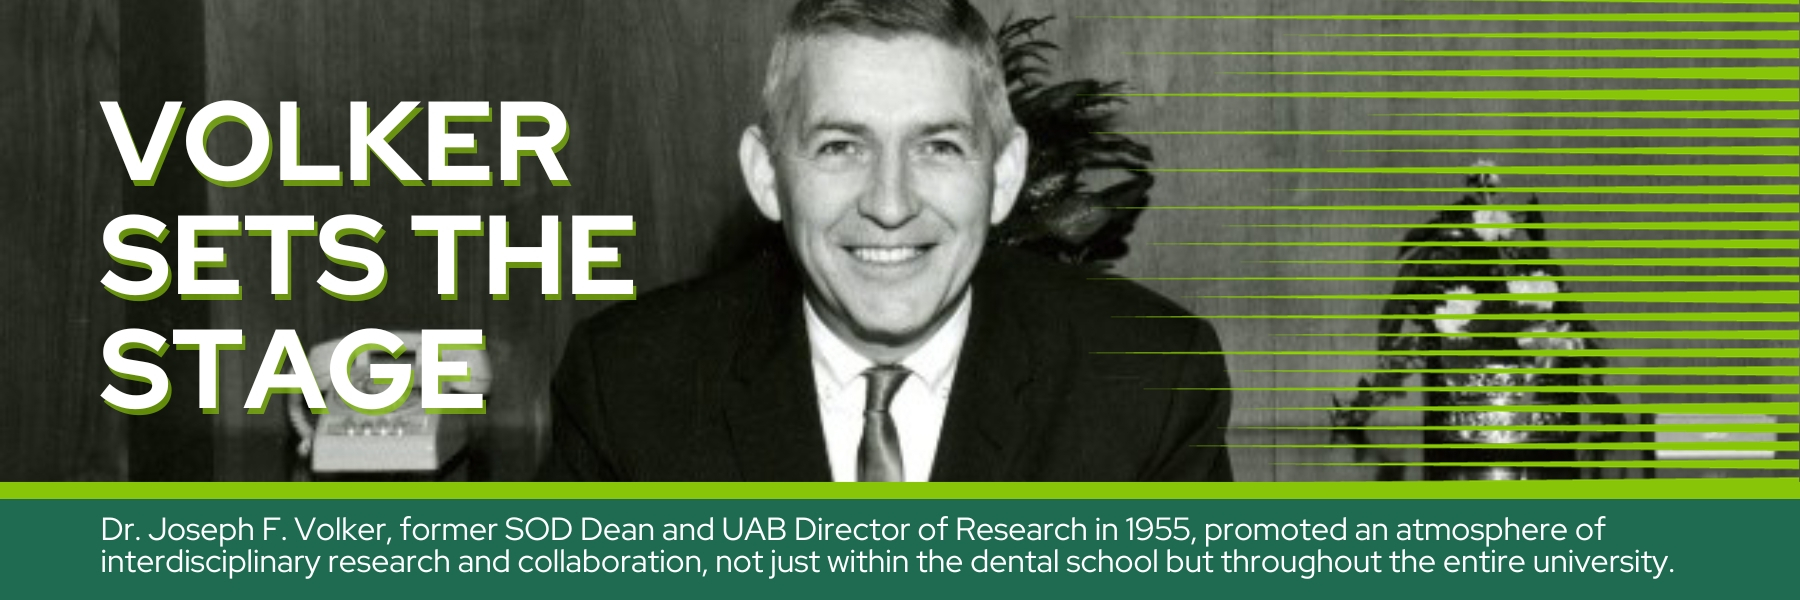 Volker Sets the stage - Dr. Joseph F. Volker, former SOD Dean and UAB Director of Research in 1955, promoted an atmosphere of interdisciplinary research and collaboration, not just within the dental school but throughout the entire university.